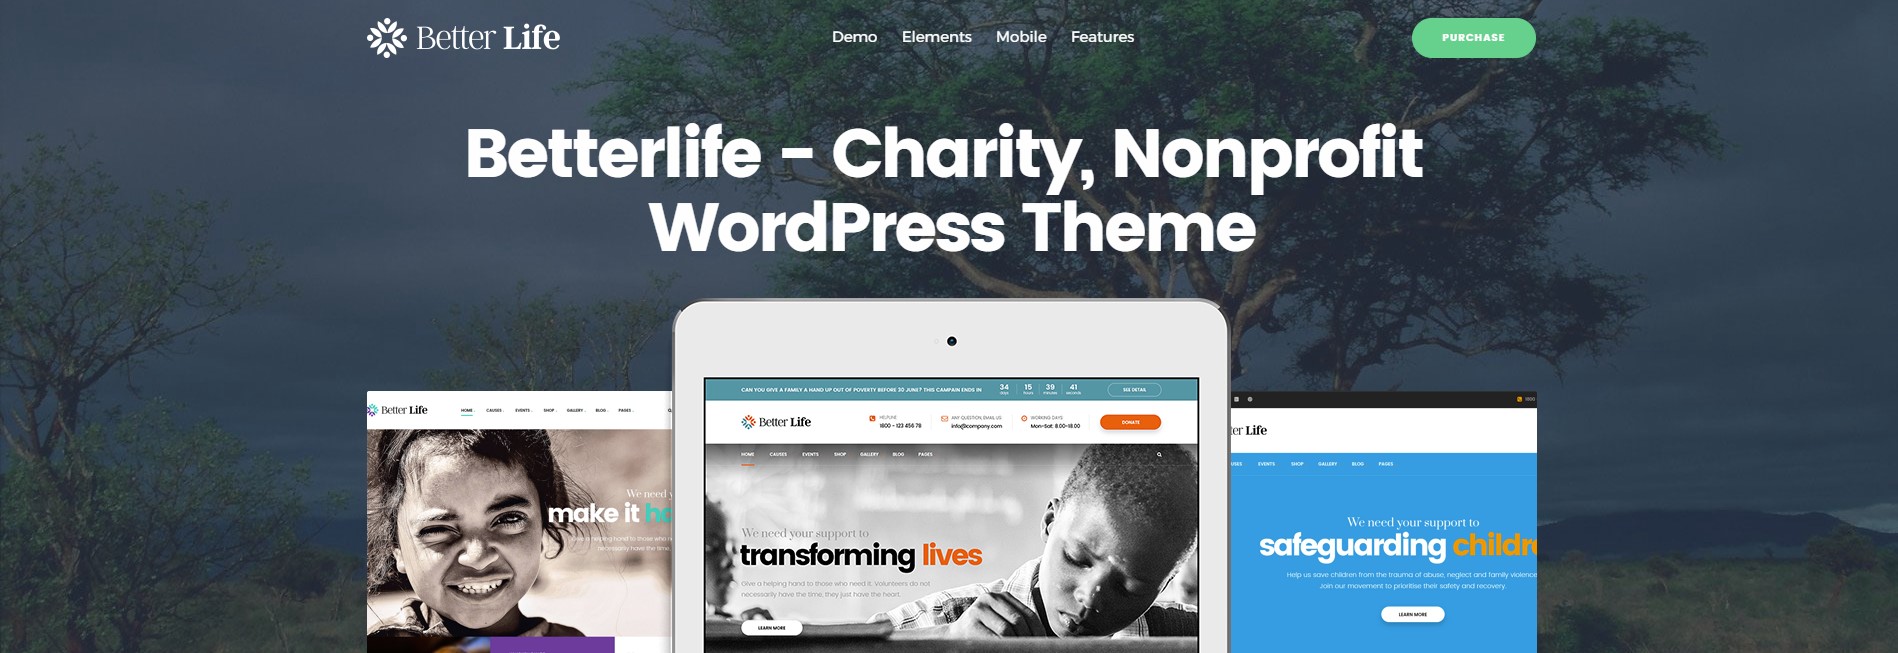 BetterLife – WordPress Theme For Churches And Charity